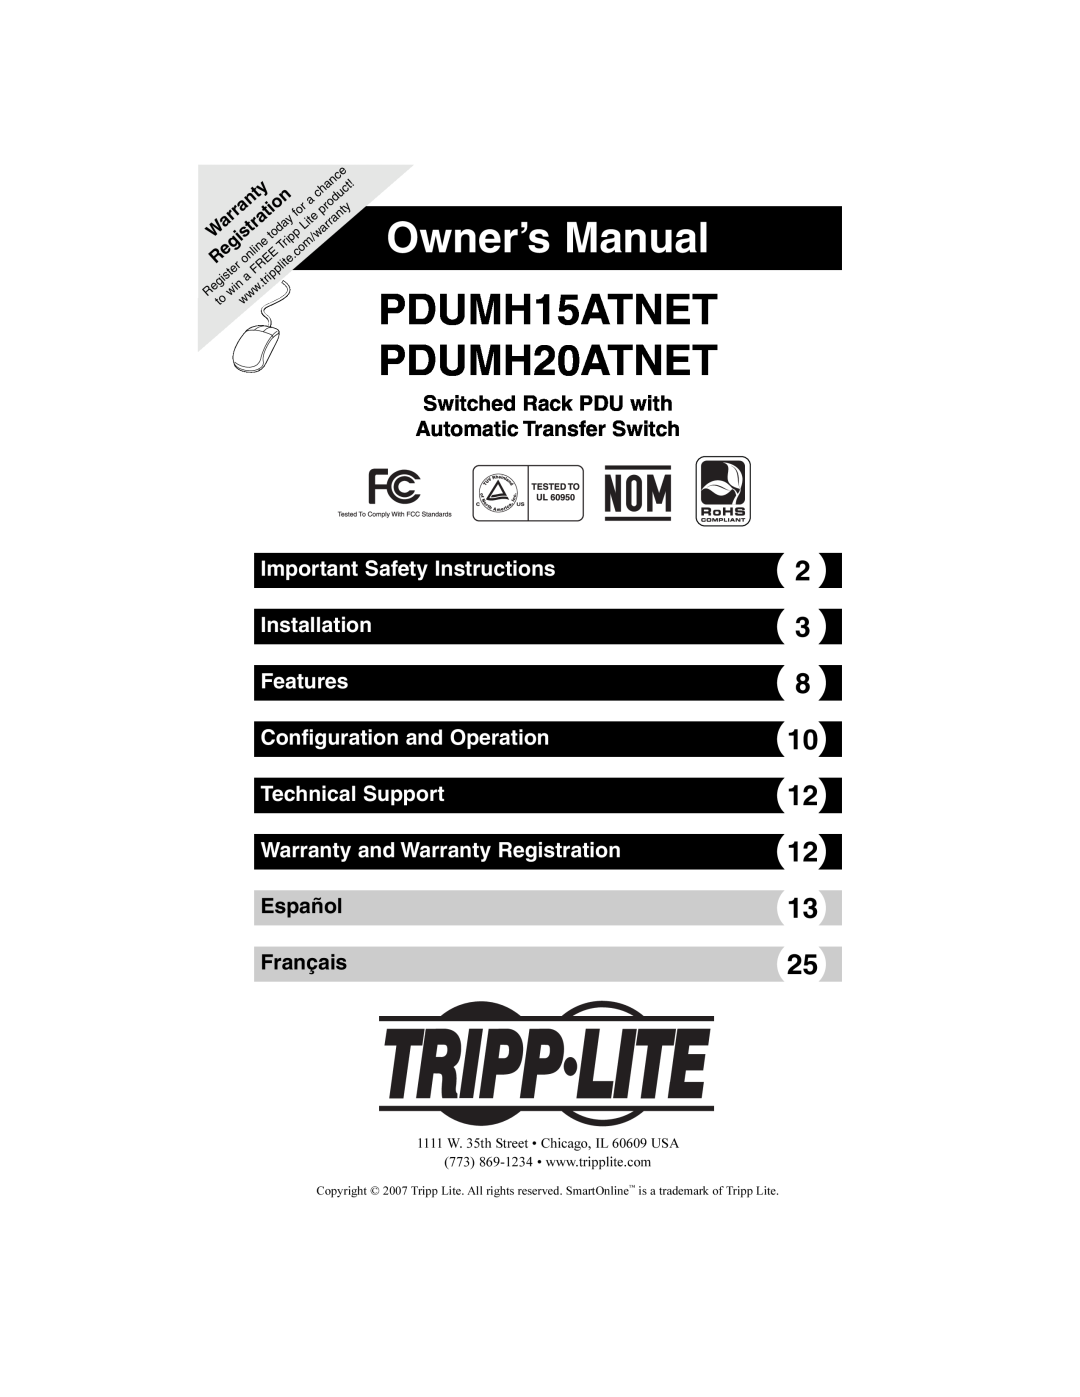 Tripp Lite owner manual Owner’s Manual, PDUMH15ATNET PDUMH20ATNET, Switched Rack PDU with Automatic Transfer Switch 